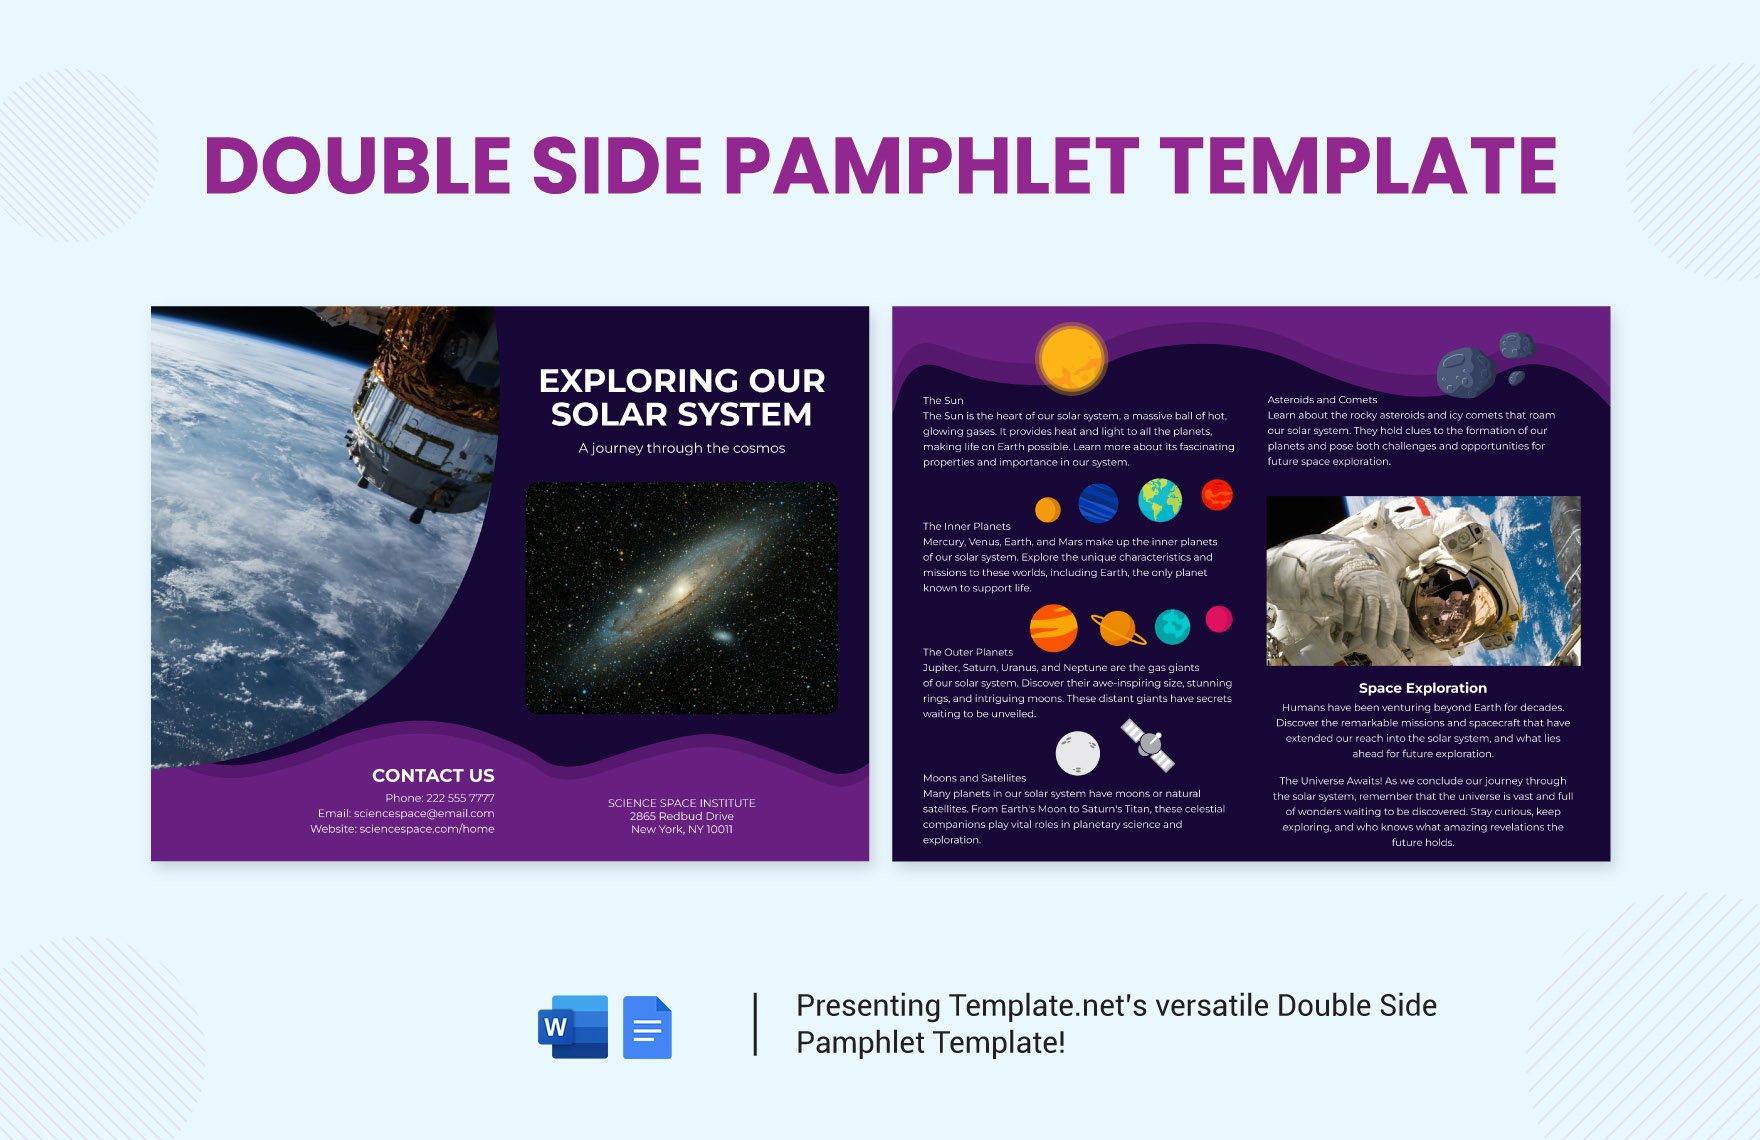 Double Side Pamphlet Template